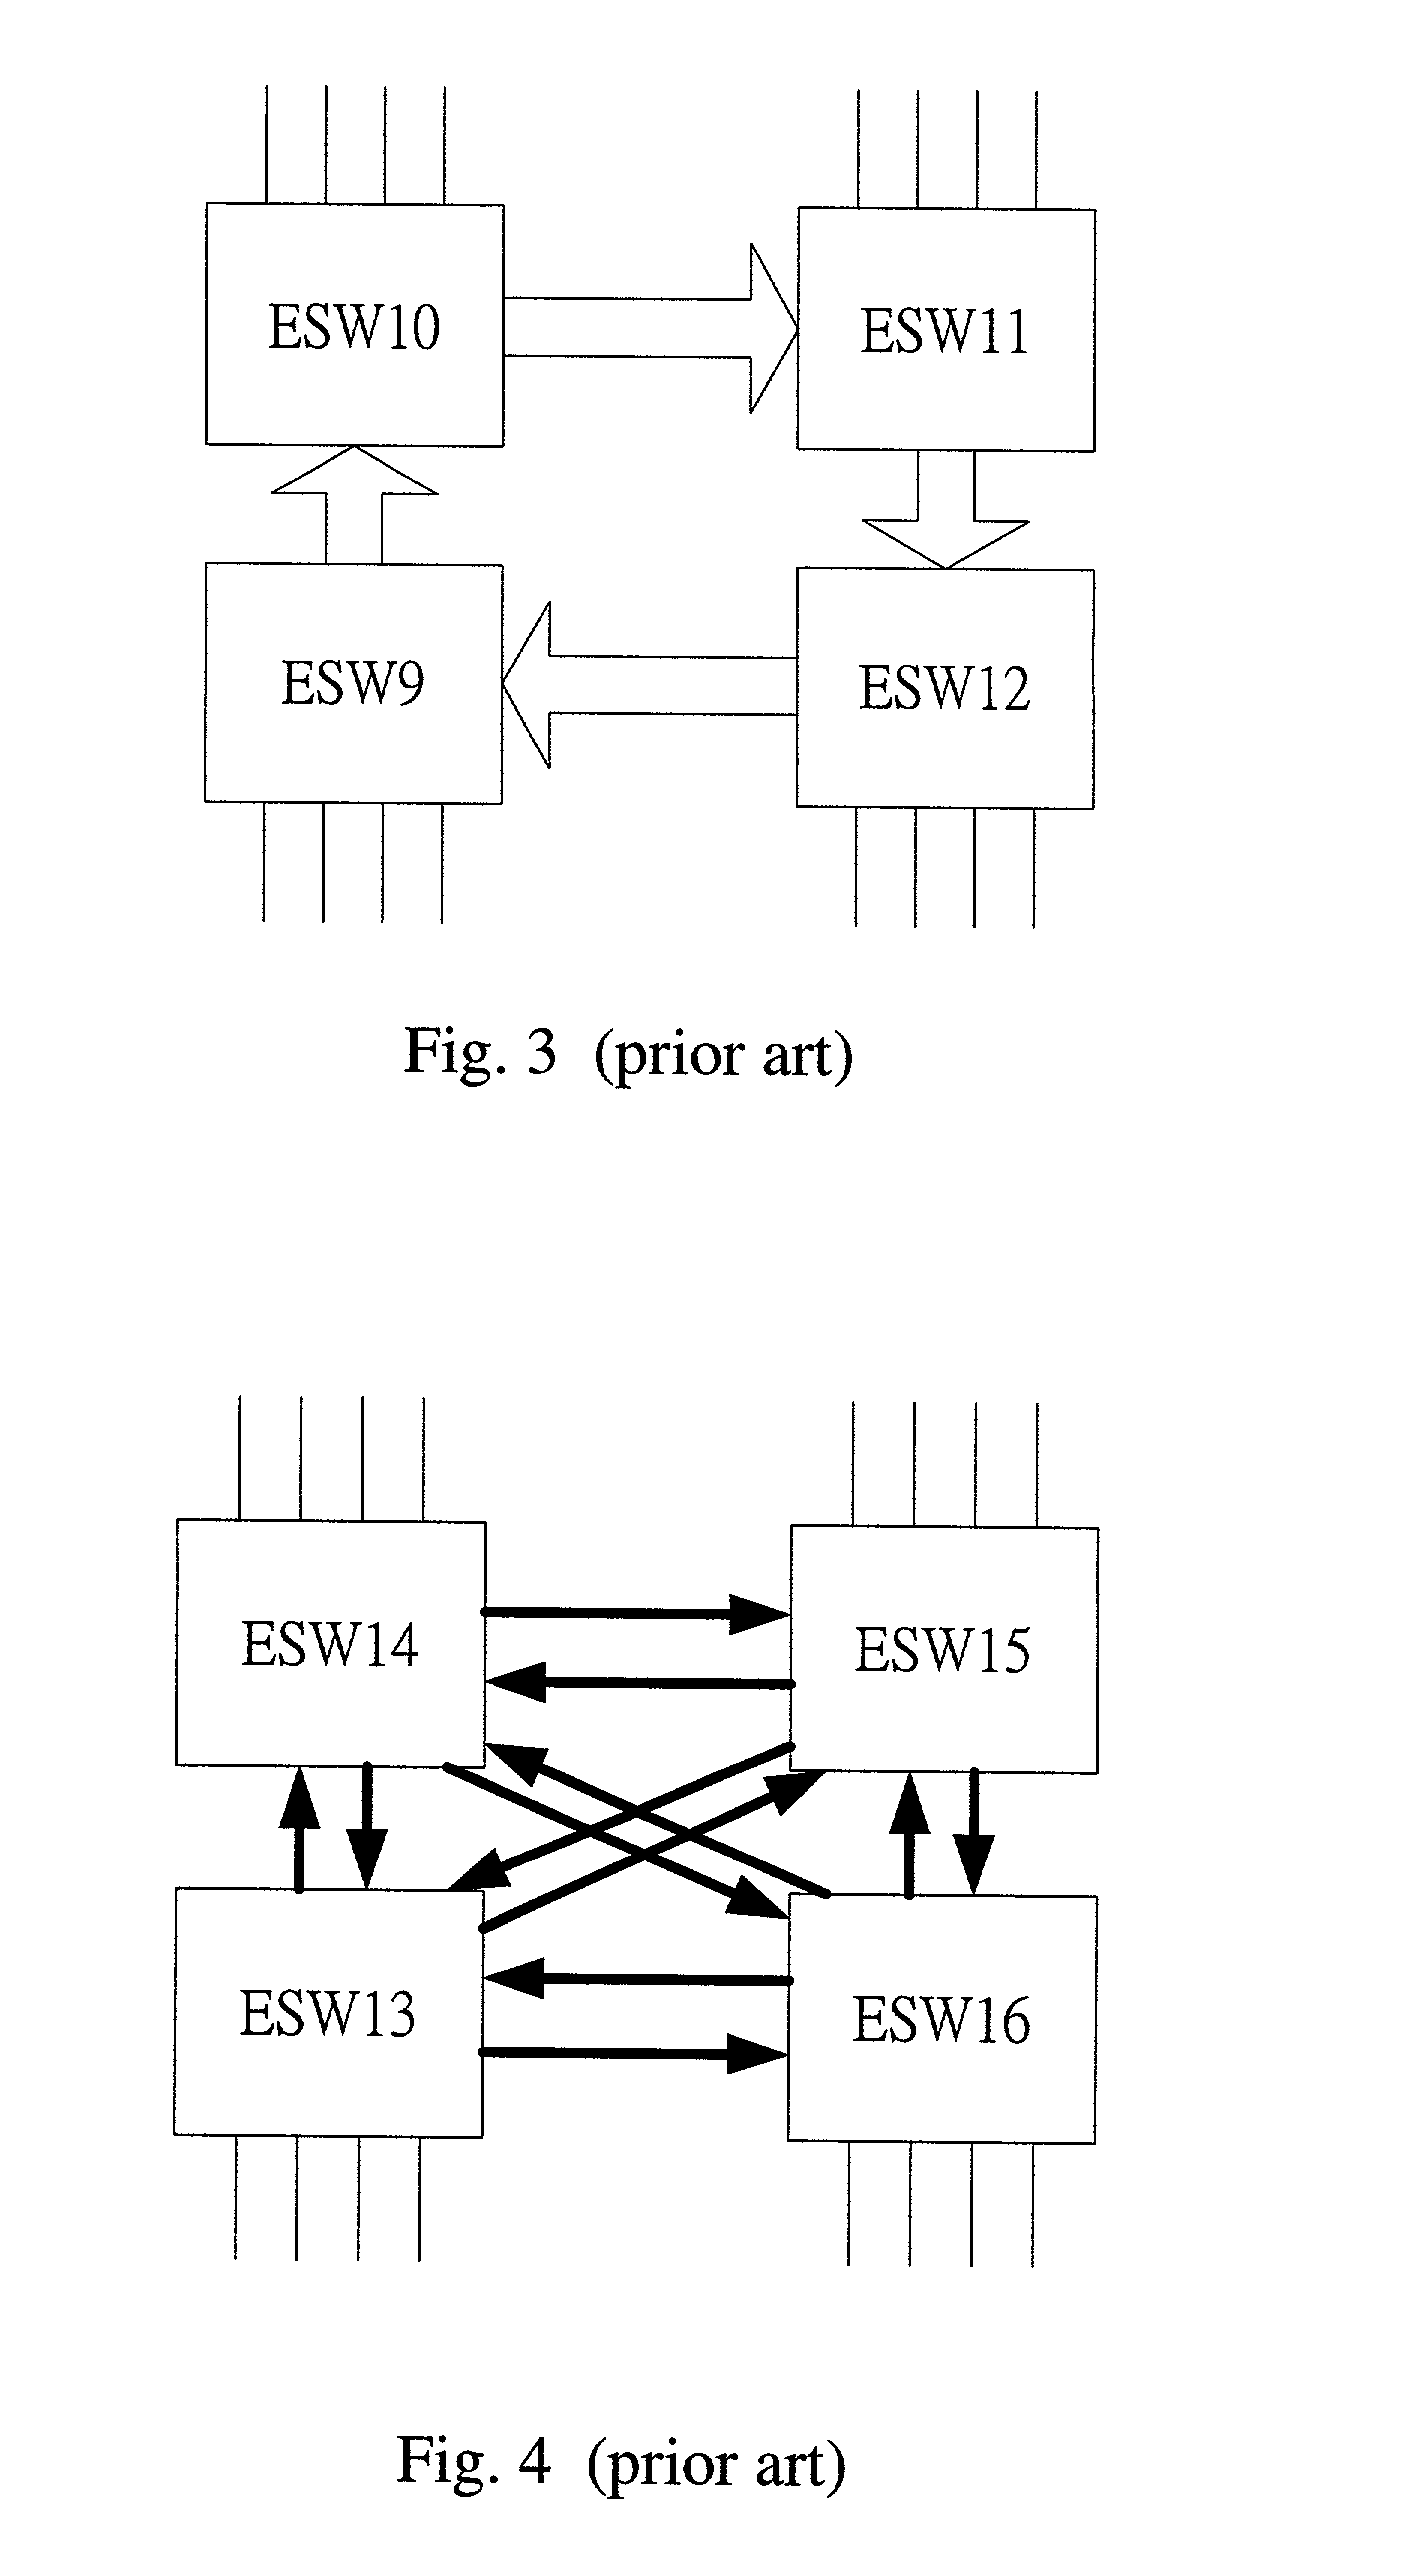 System and method of stacking network switches